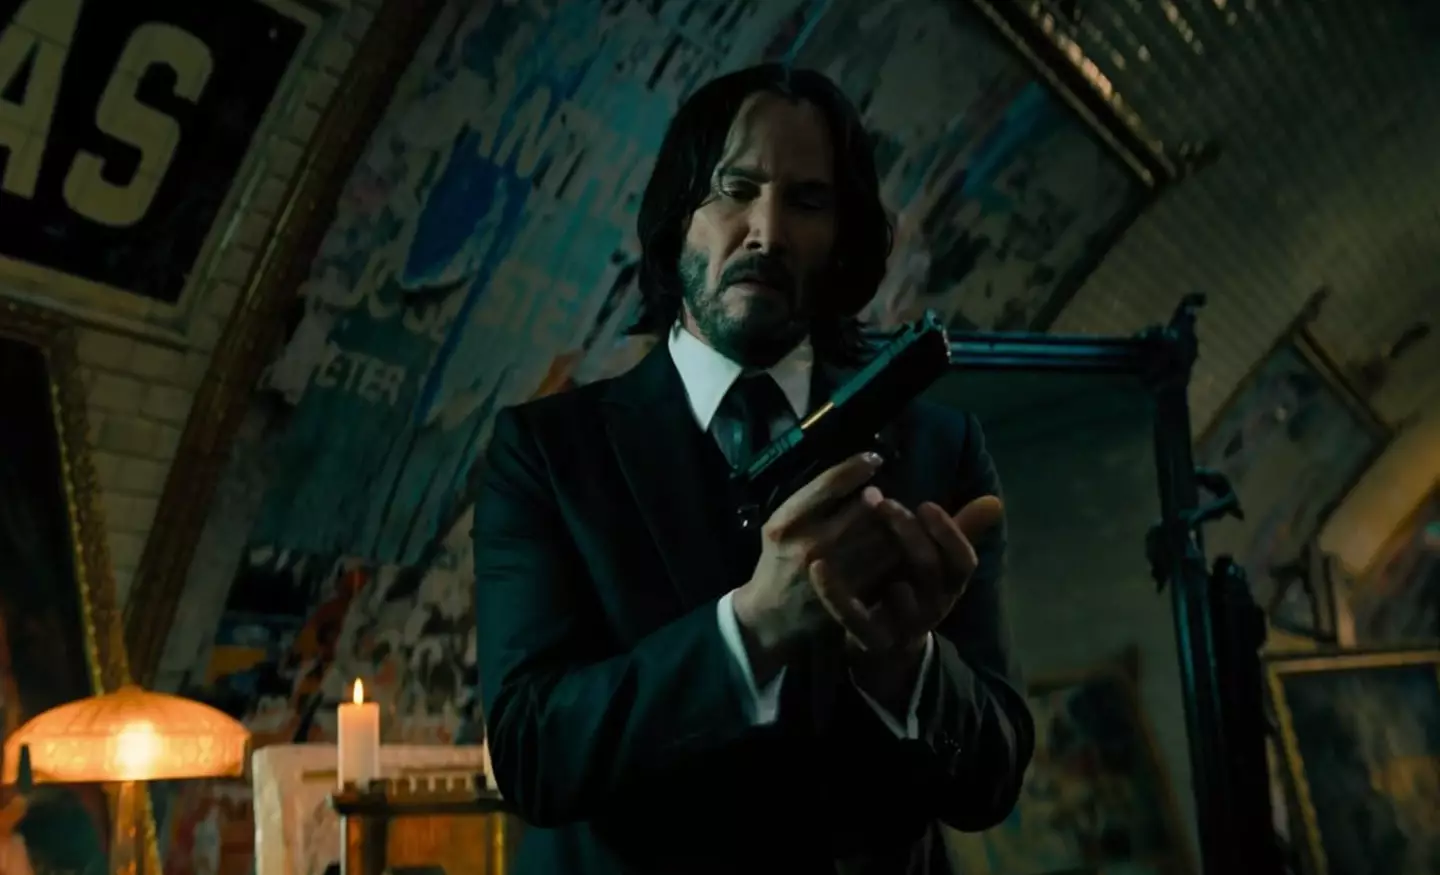 Franchise producer Basil Iwanyk has said there has been reluctance to kill of the John Wick character due to future plans for the franchise.